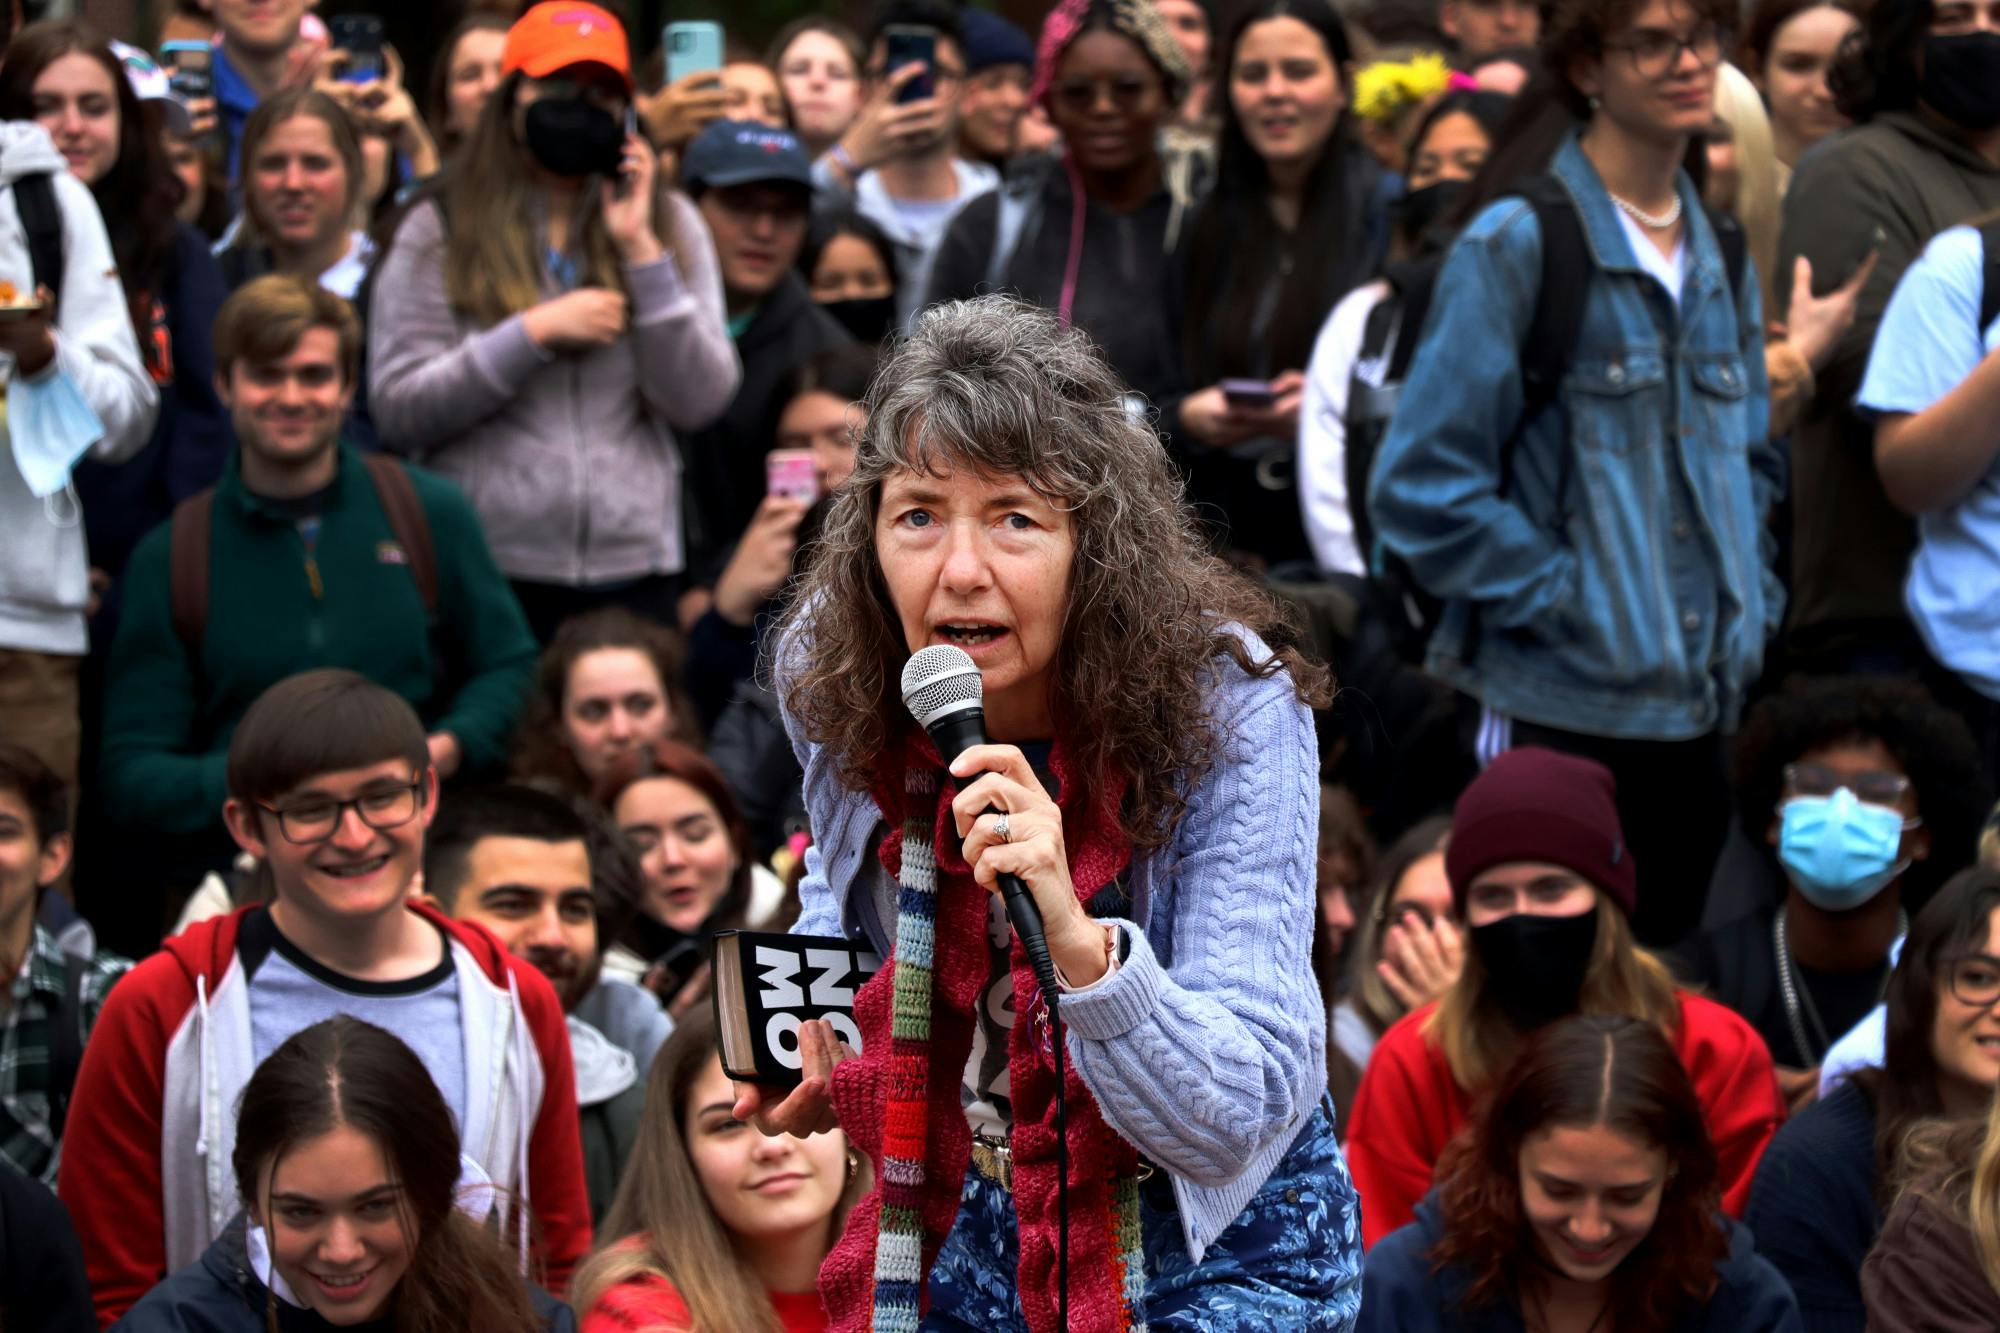 Infamous TikTok street preacher “Sister Cindy” returns to UF, draws a crowd of heckling students Adult Picture